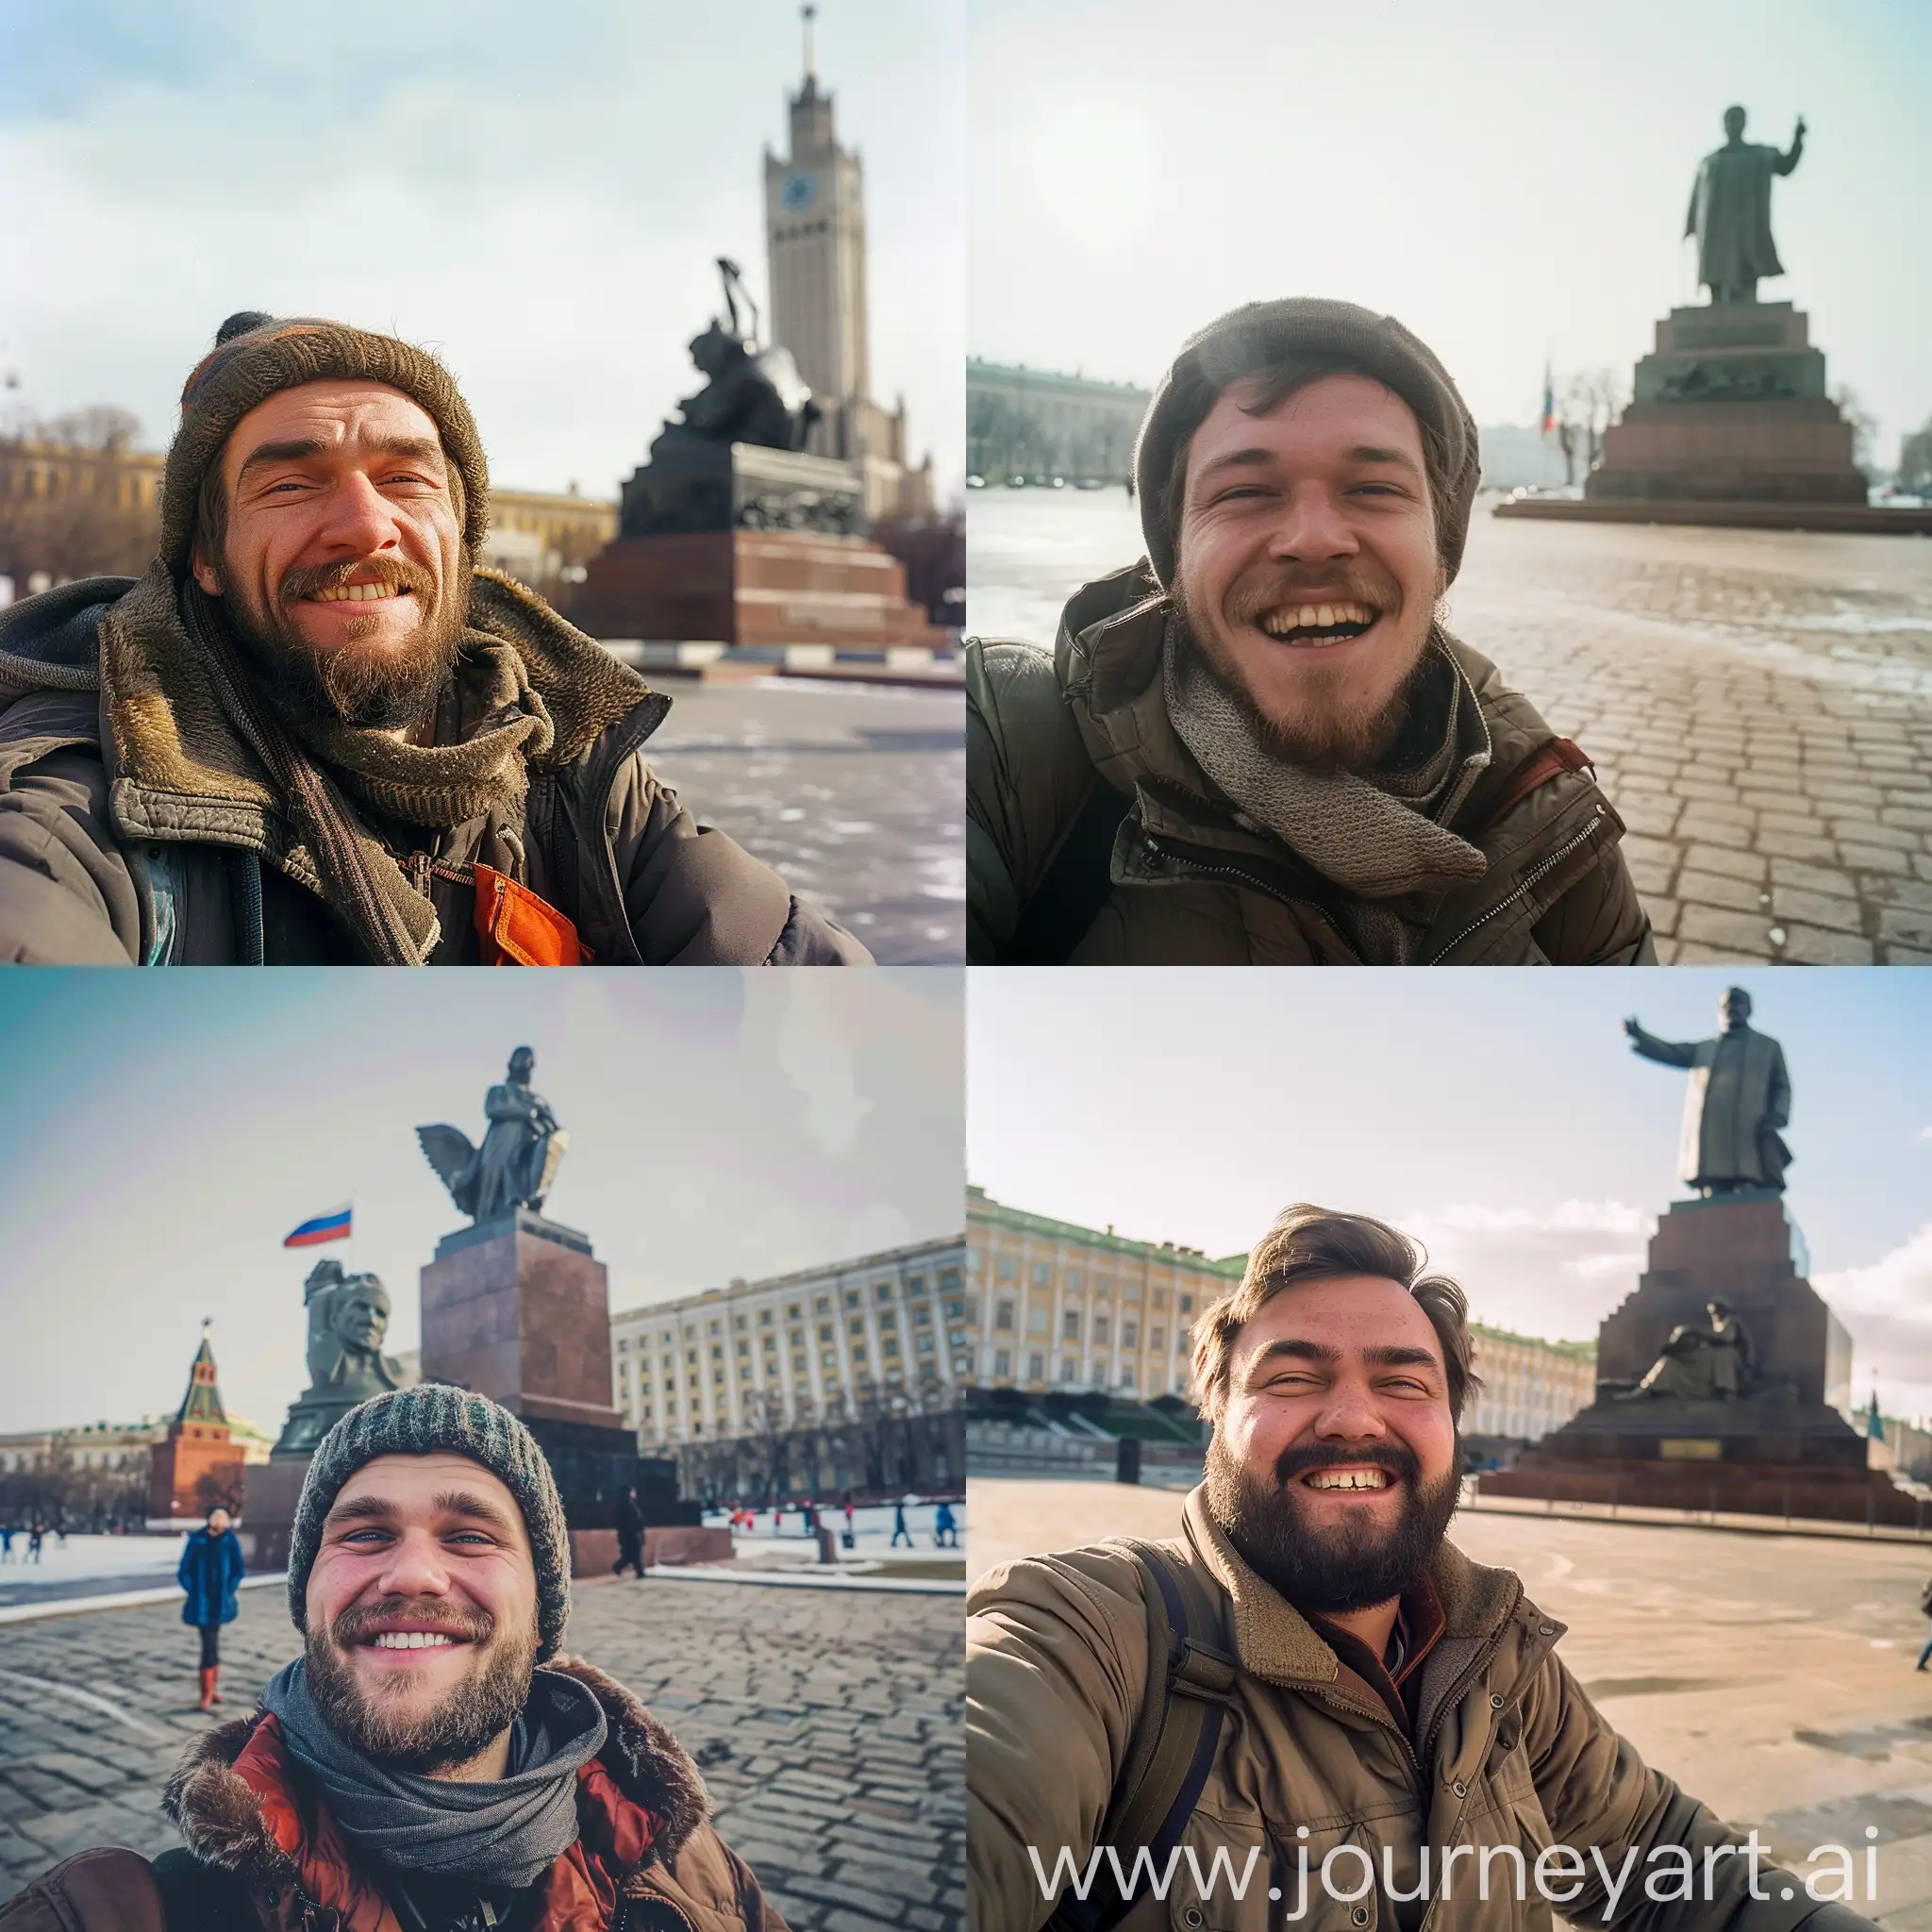 Russian drunk man, Smiling, selfie photo on the background of the Lenin monument, Russian city square, film photo